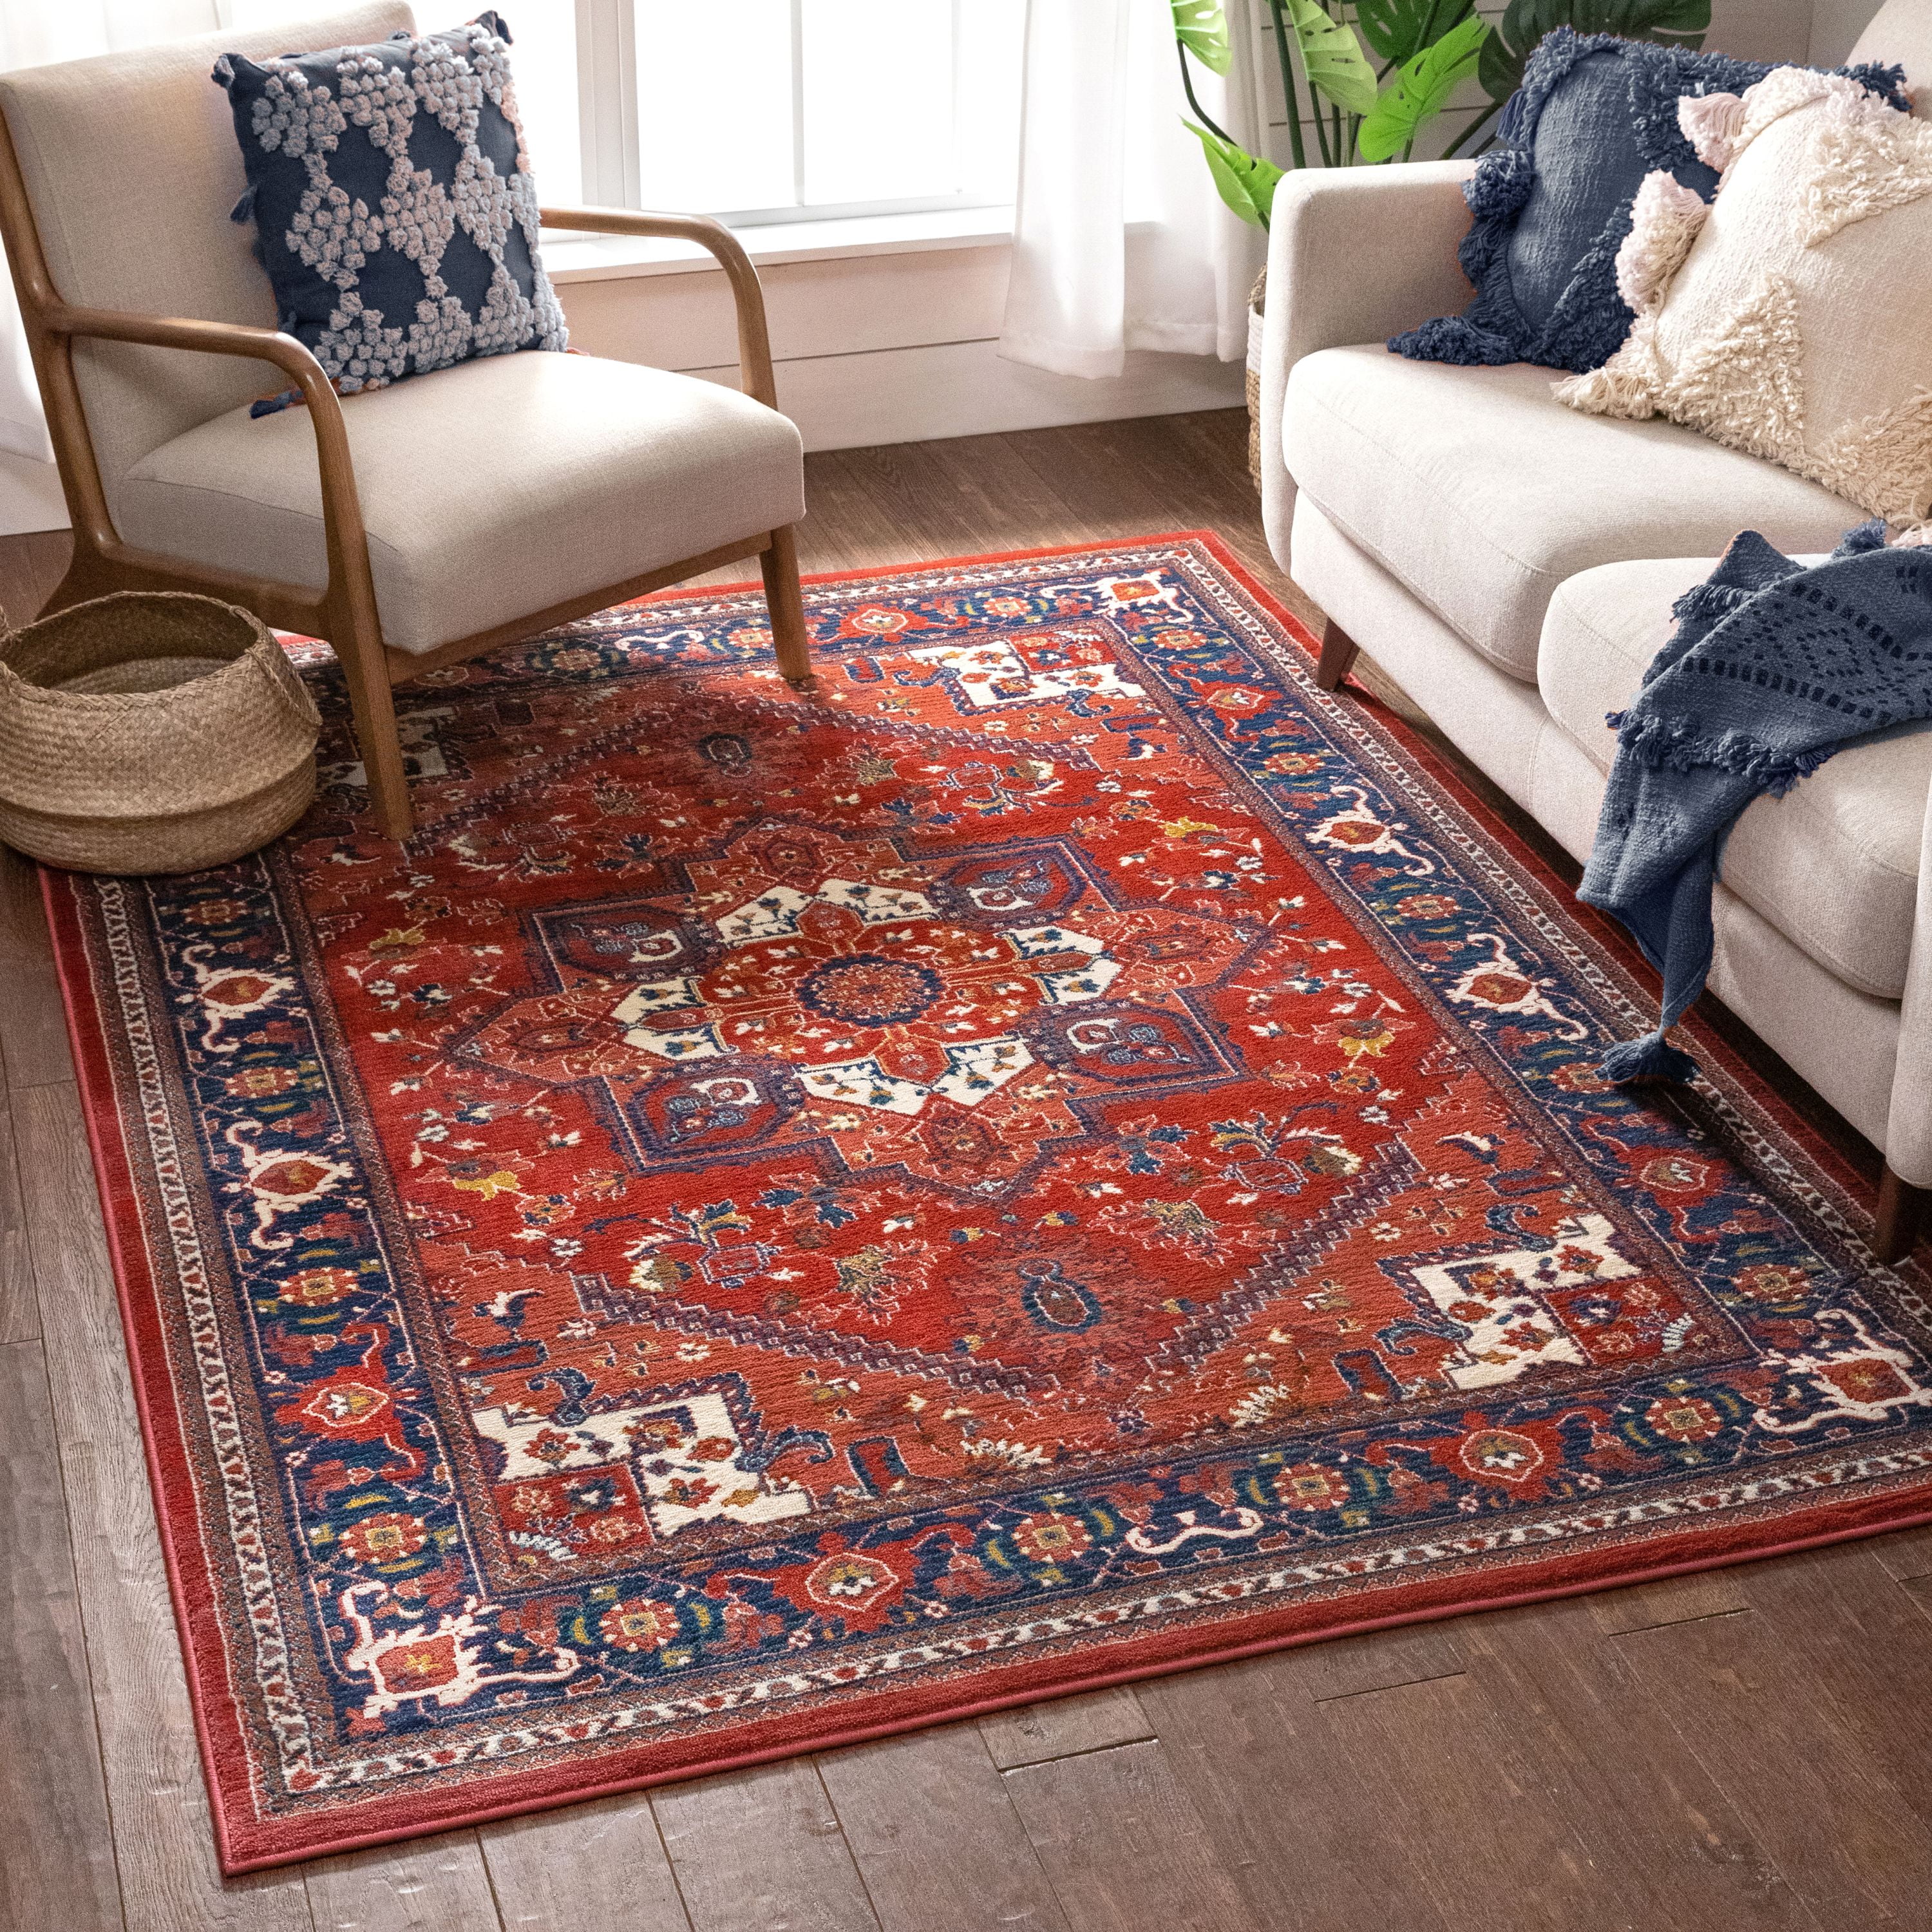 Rust Red Traditional Living Room RugSmall Large Distressed Tribal Rug Runner 